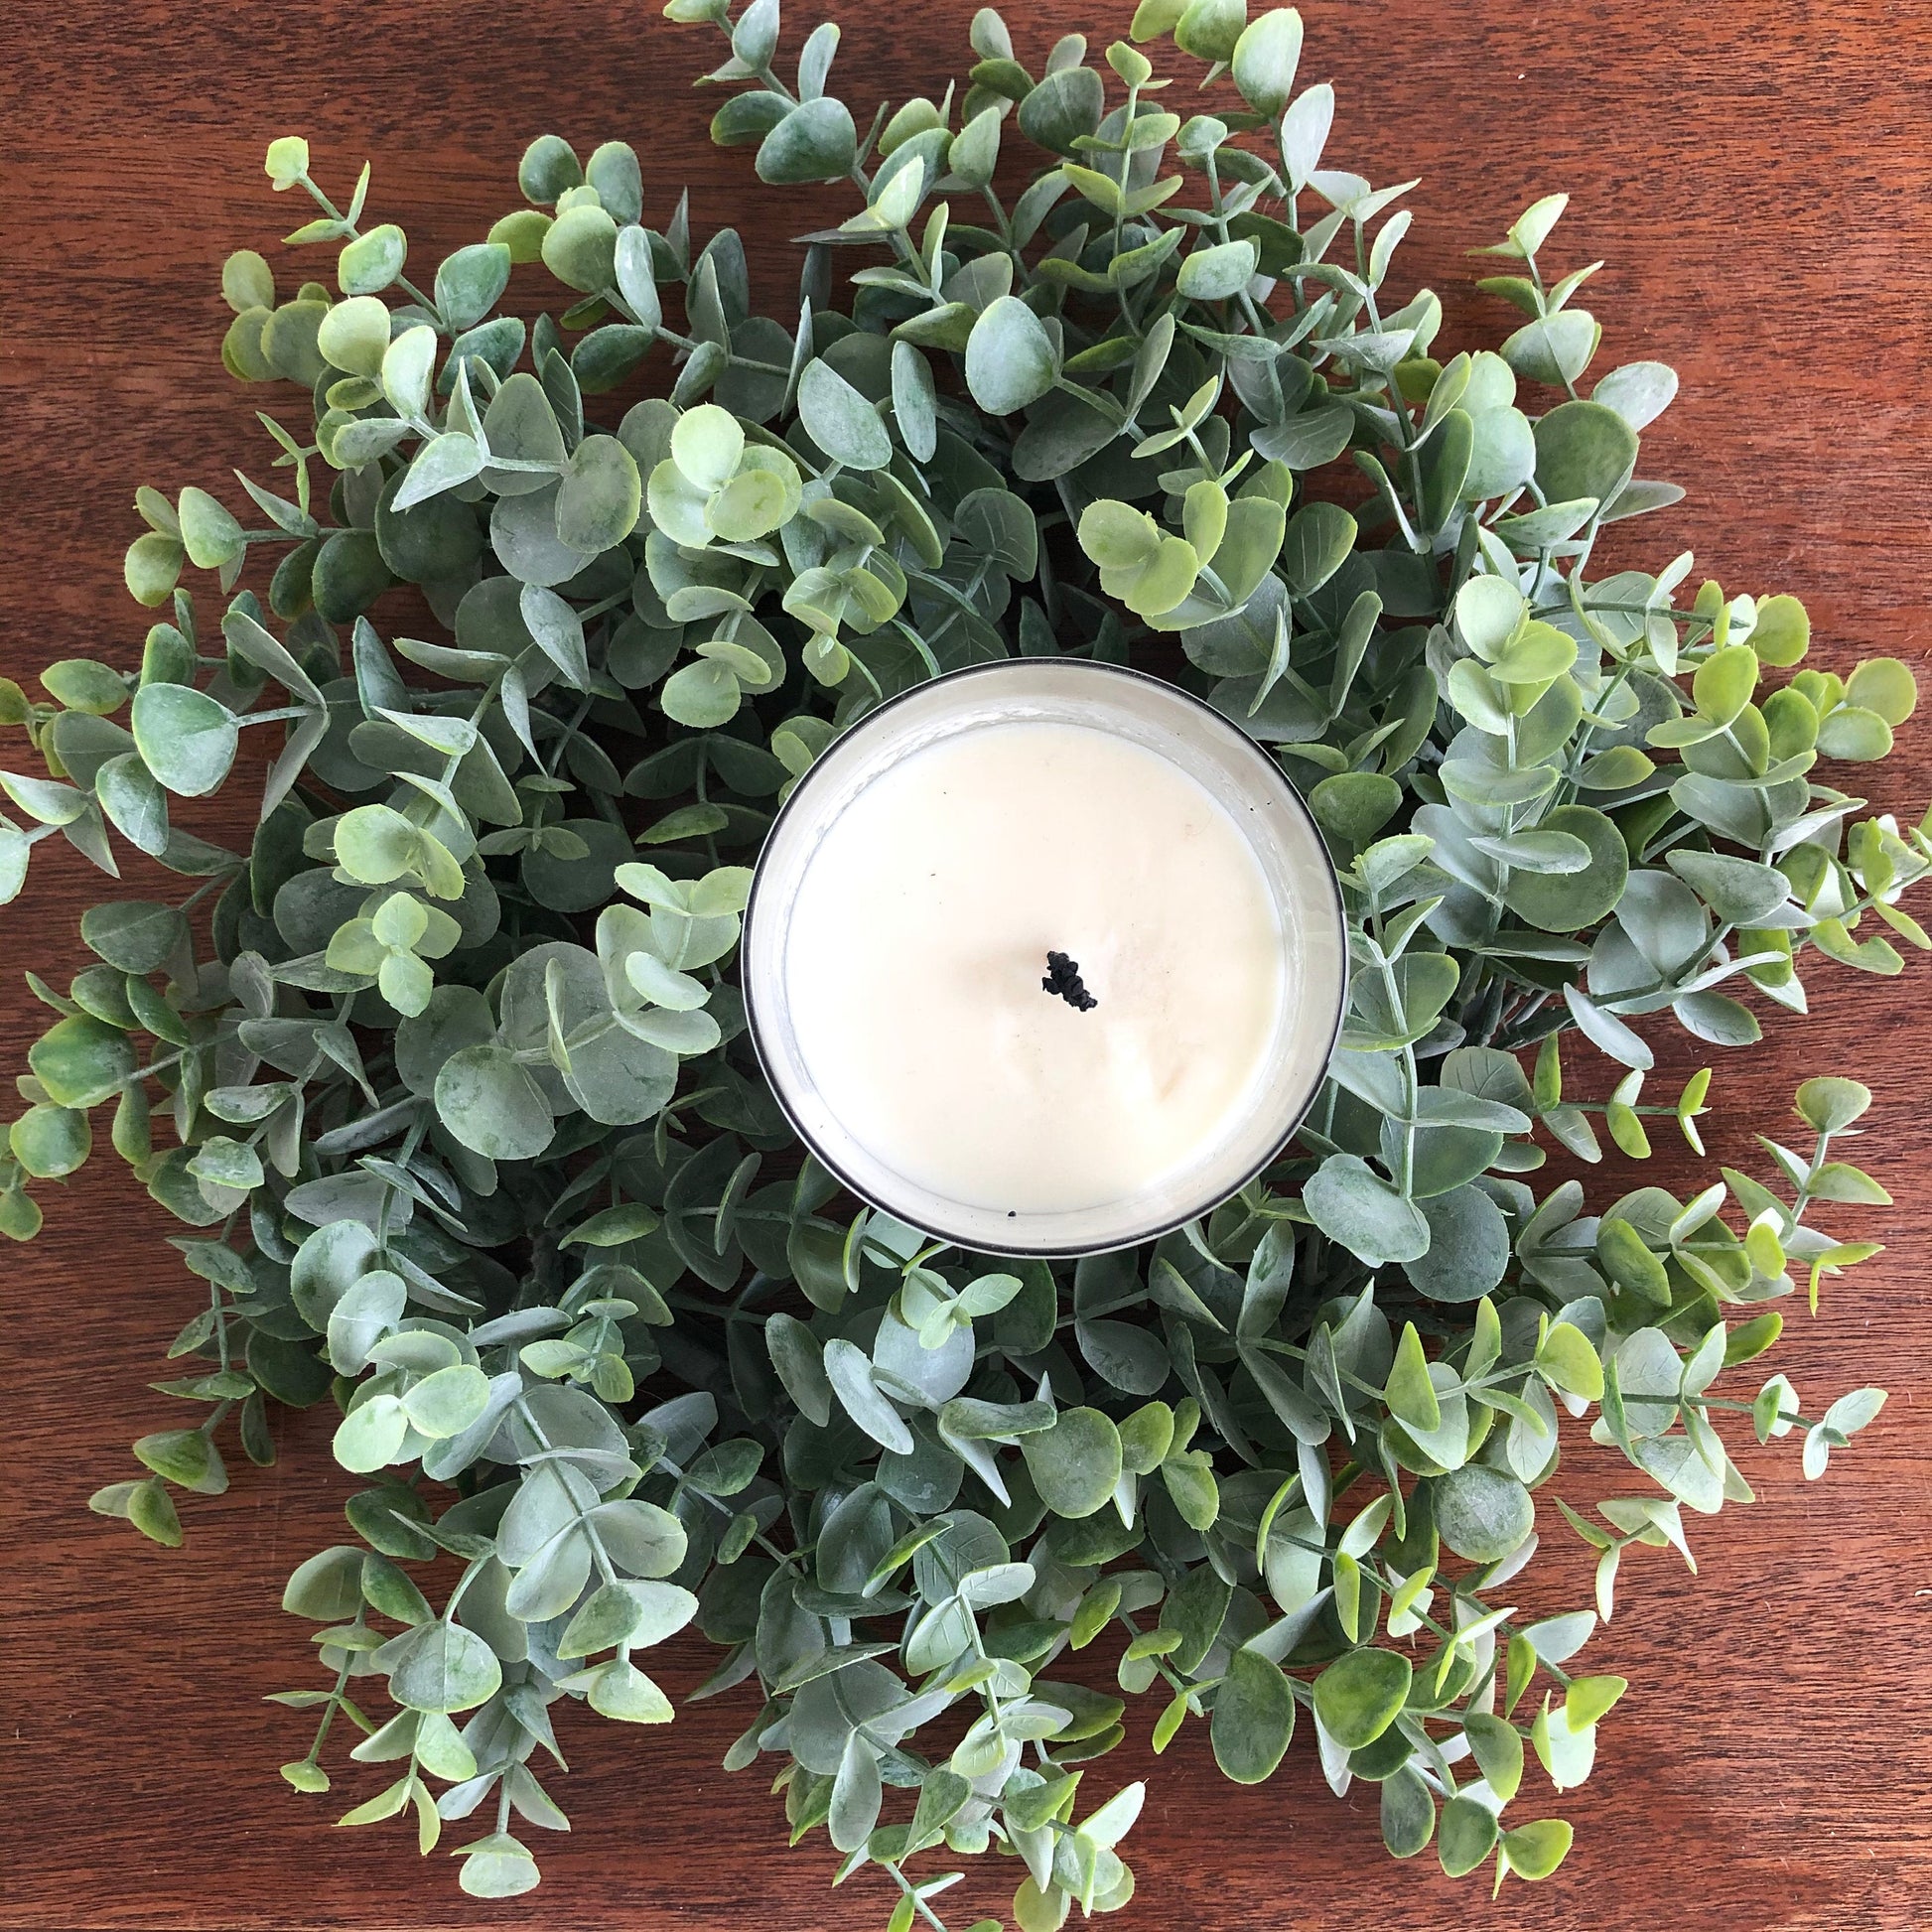 Eucalyptus Candle Ring Wreath, Greenery Candle Ring, Floral Candle Ring,  Small Farmhouse Wreath